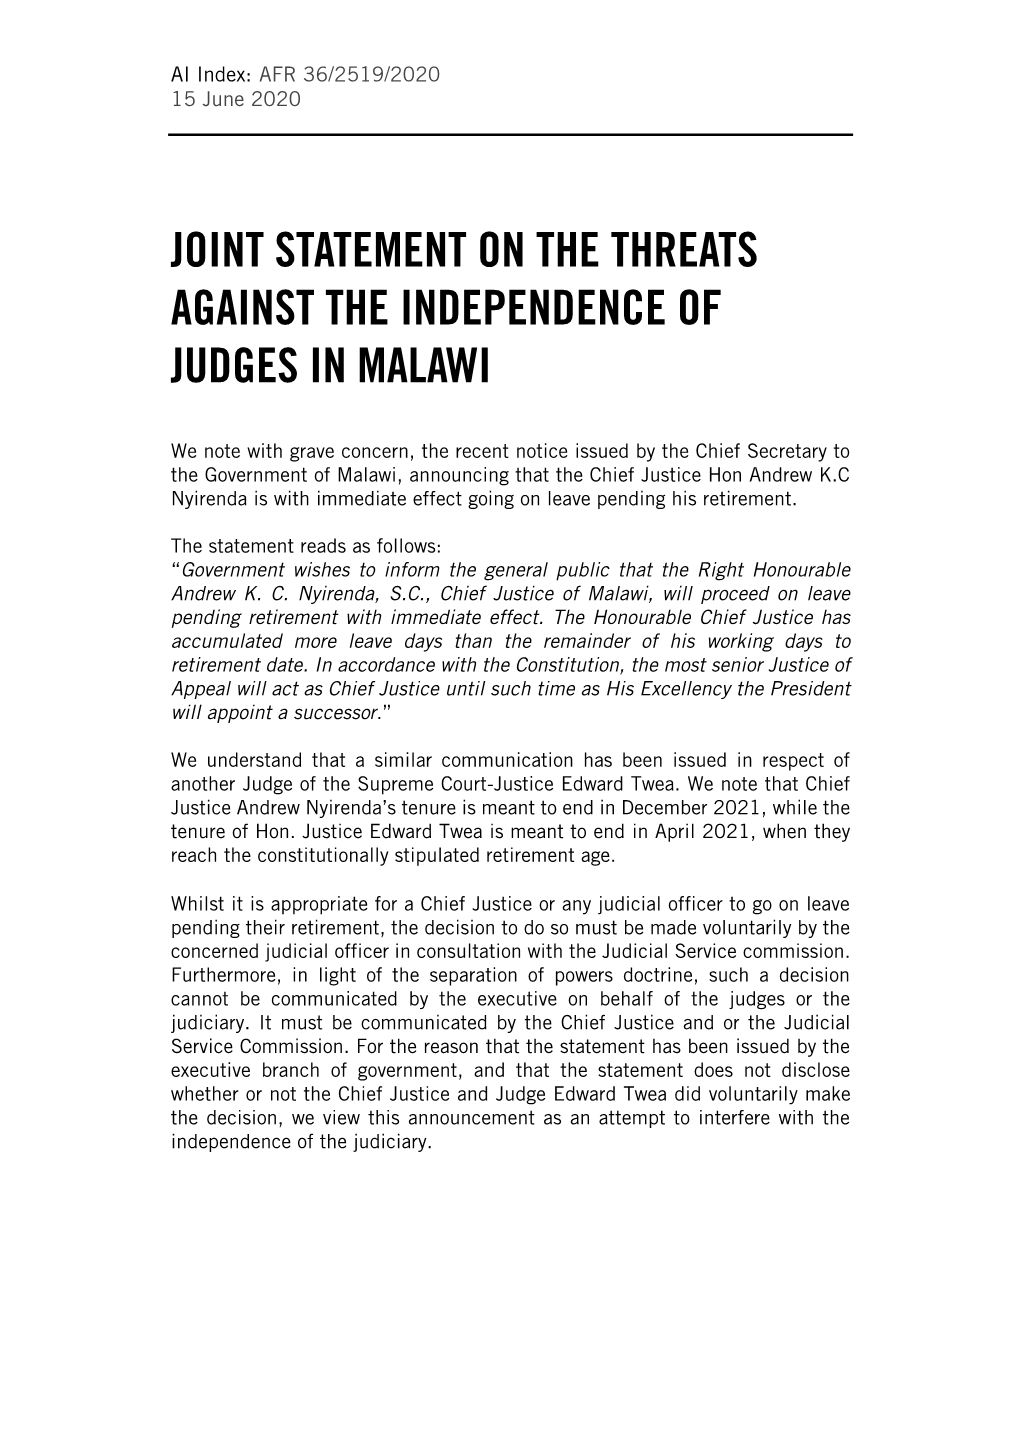 Joint Statement on the Threats Against the Independence of Judges in Malawi